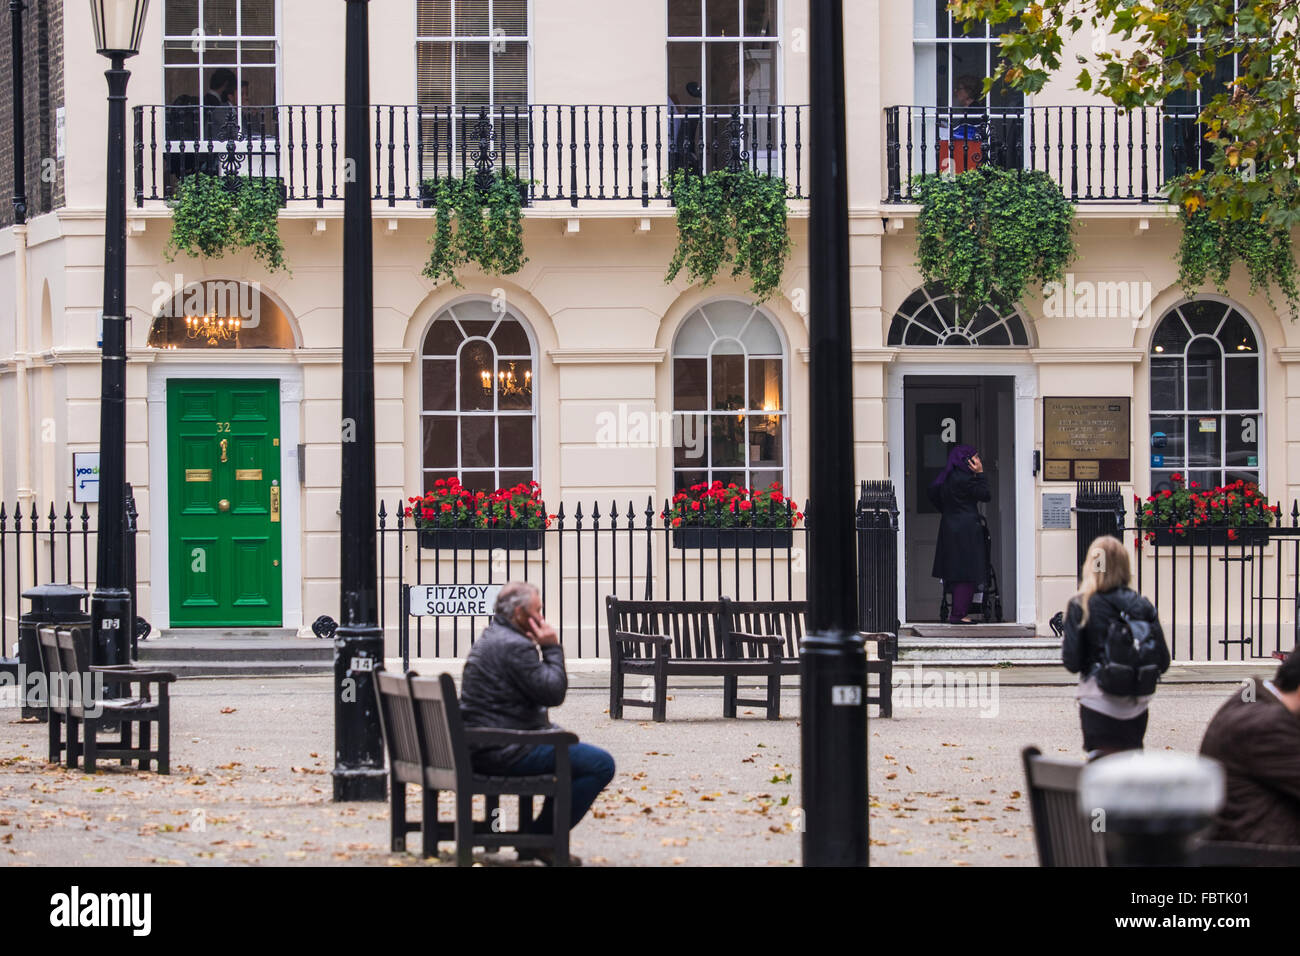 Fitzroy Square, Londres, Angleterre, Royaume-Uni Banque D'Images